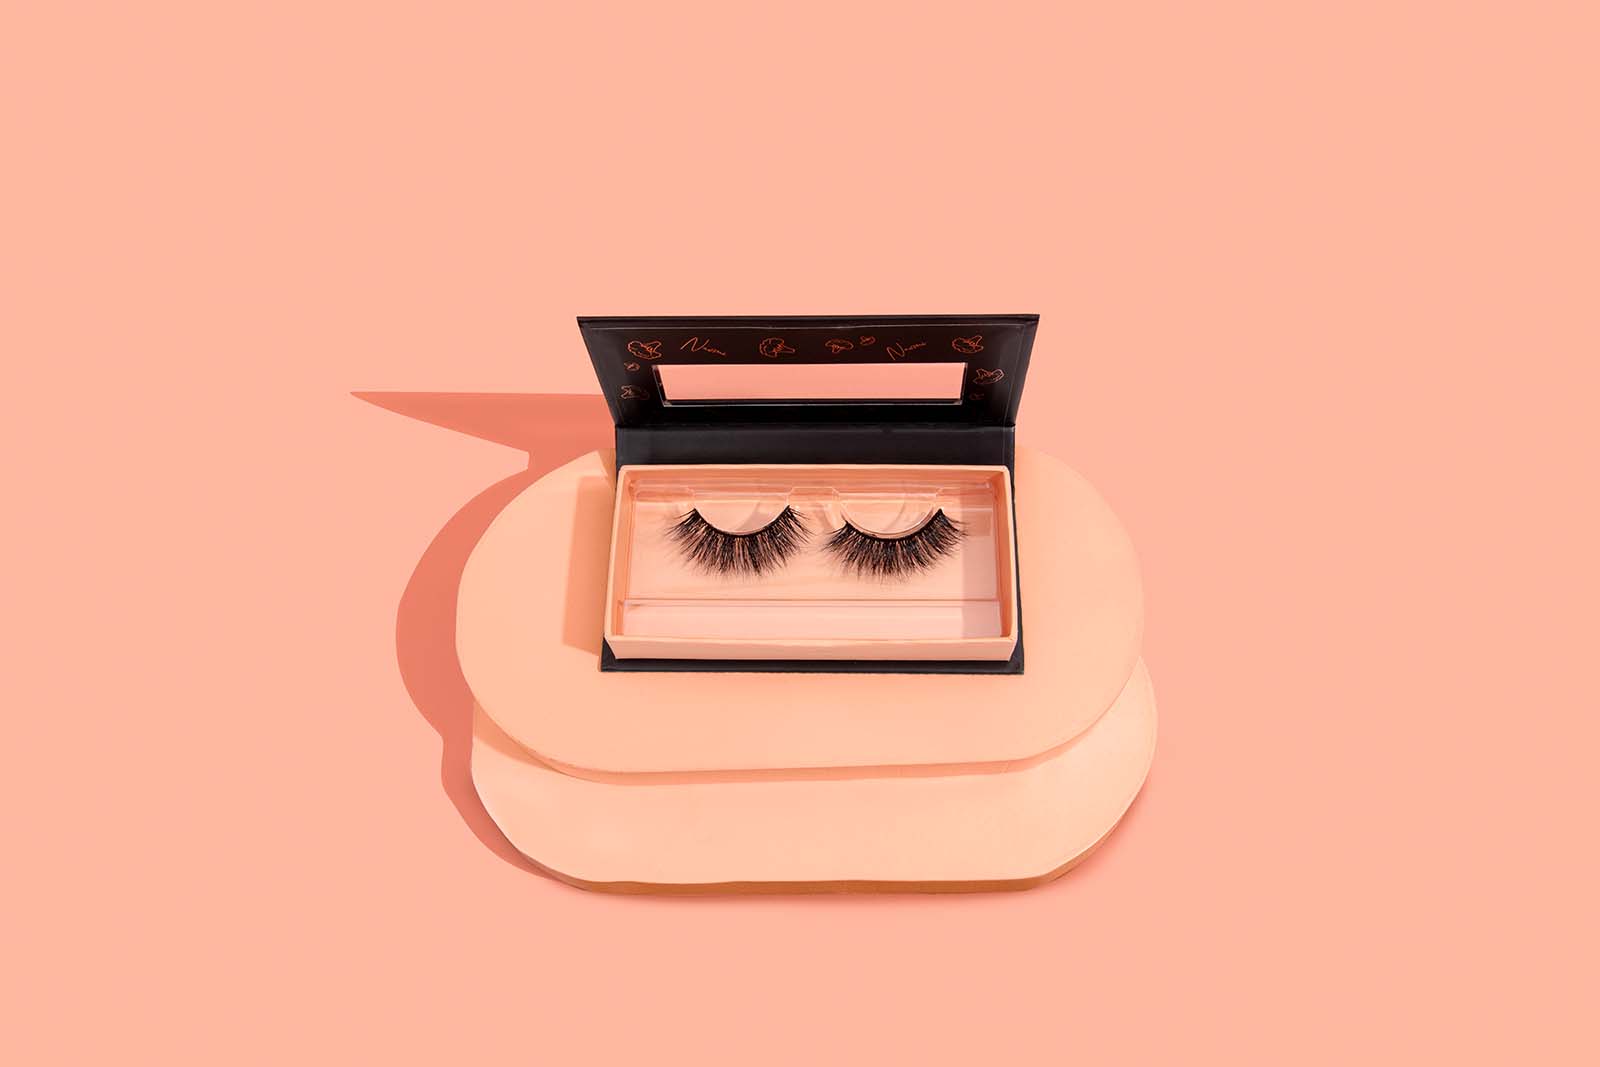 Minimal Product Photography for a False Lash Brand. Styled Product Stills by Colourpop Studio. Minimal Summer Styled Product Photos